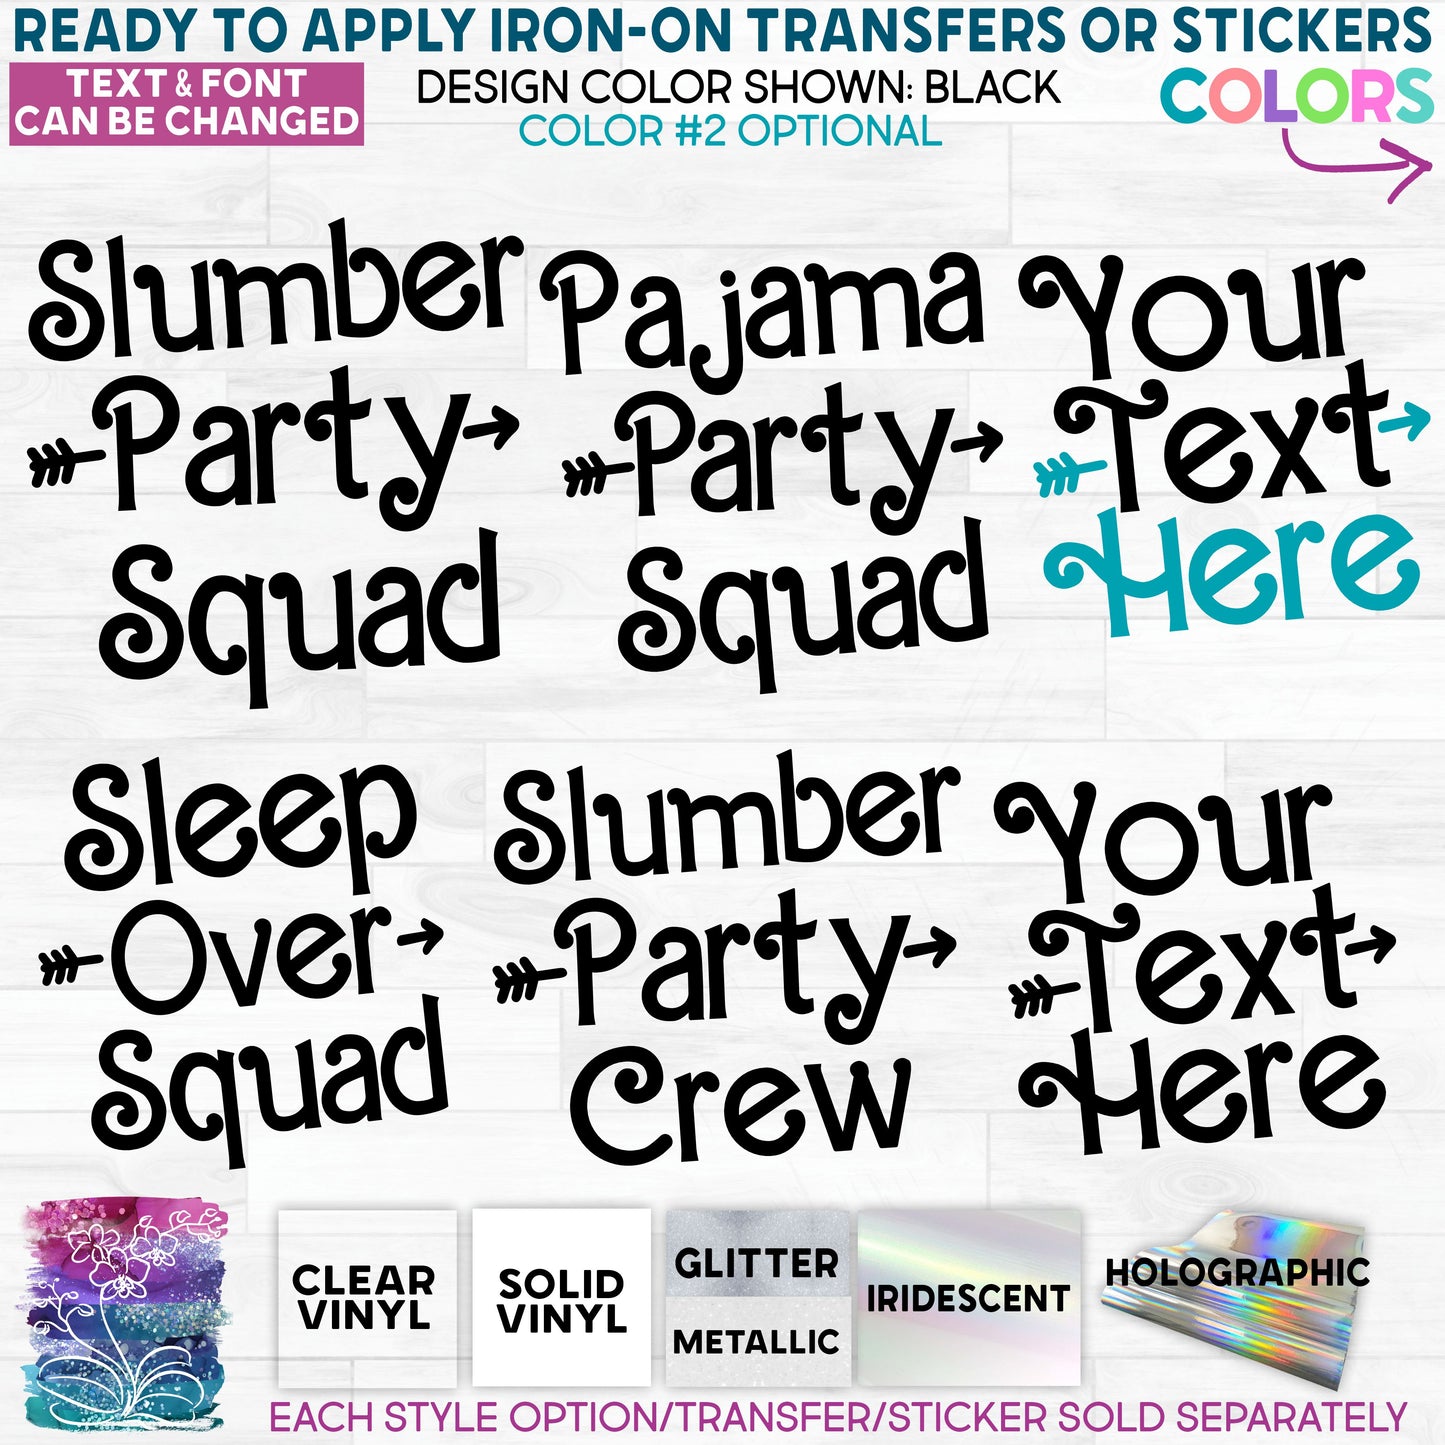 s217-F Slumber Party Sleep Over Squad Pajama Party Squad Made-to-Order Iron-On Transfer or Sticker